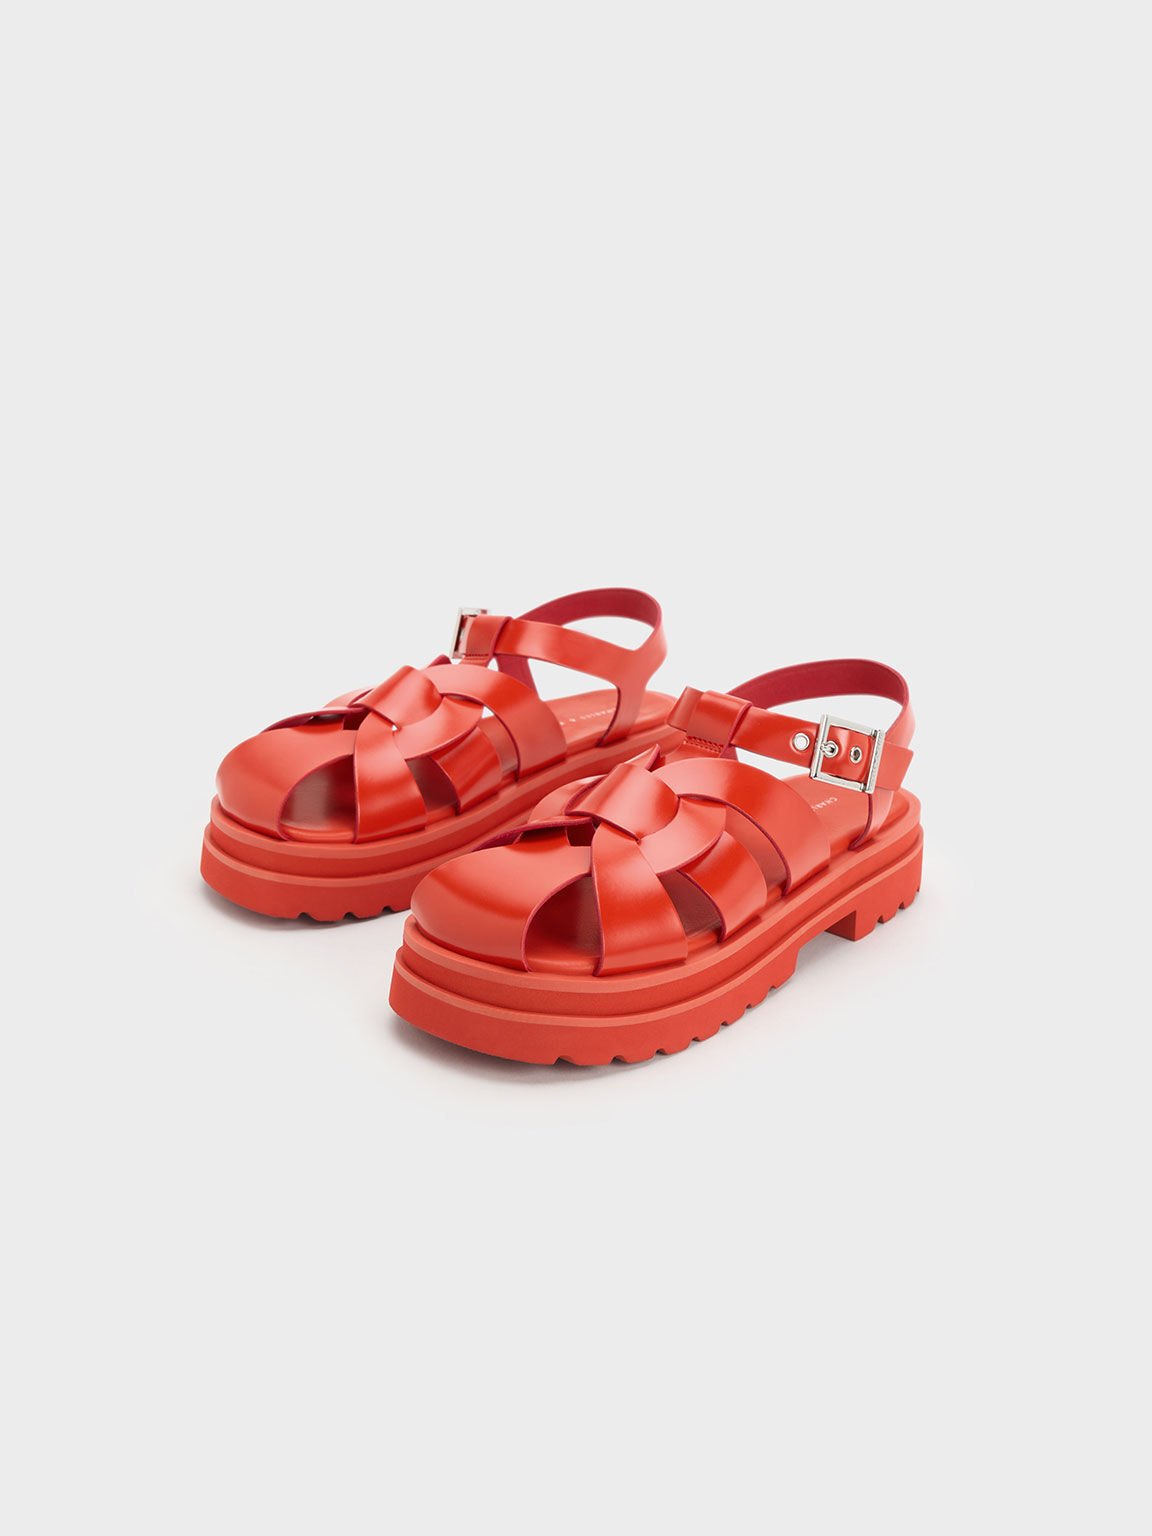 Nell Gladiator Sandals, Red, hi-res